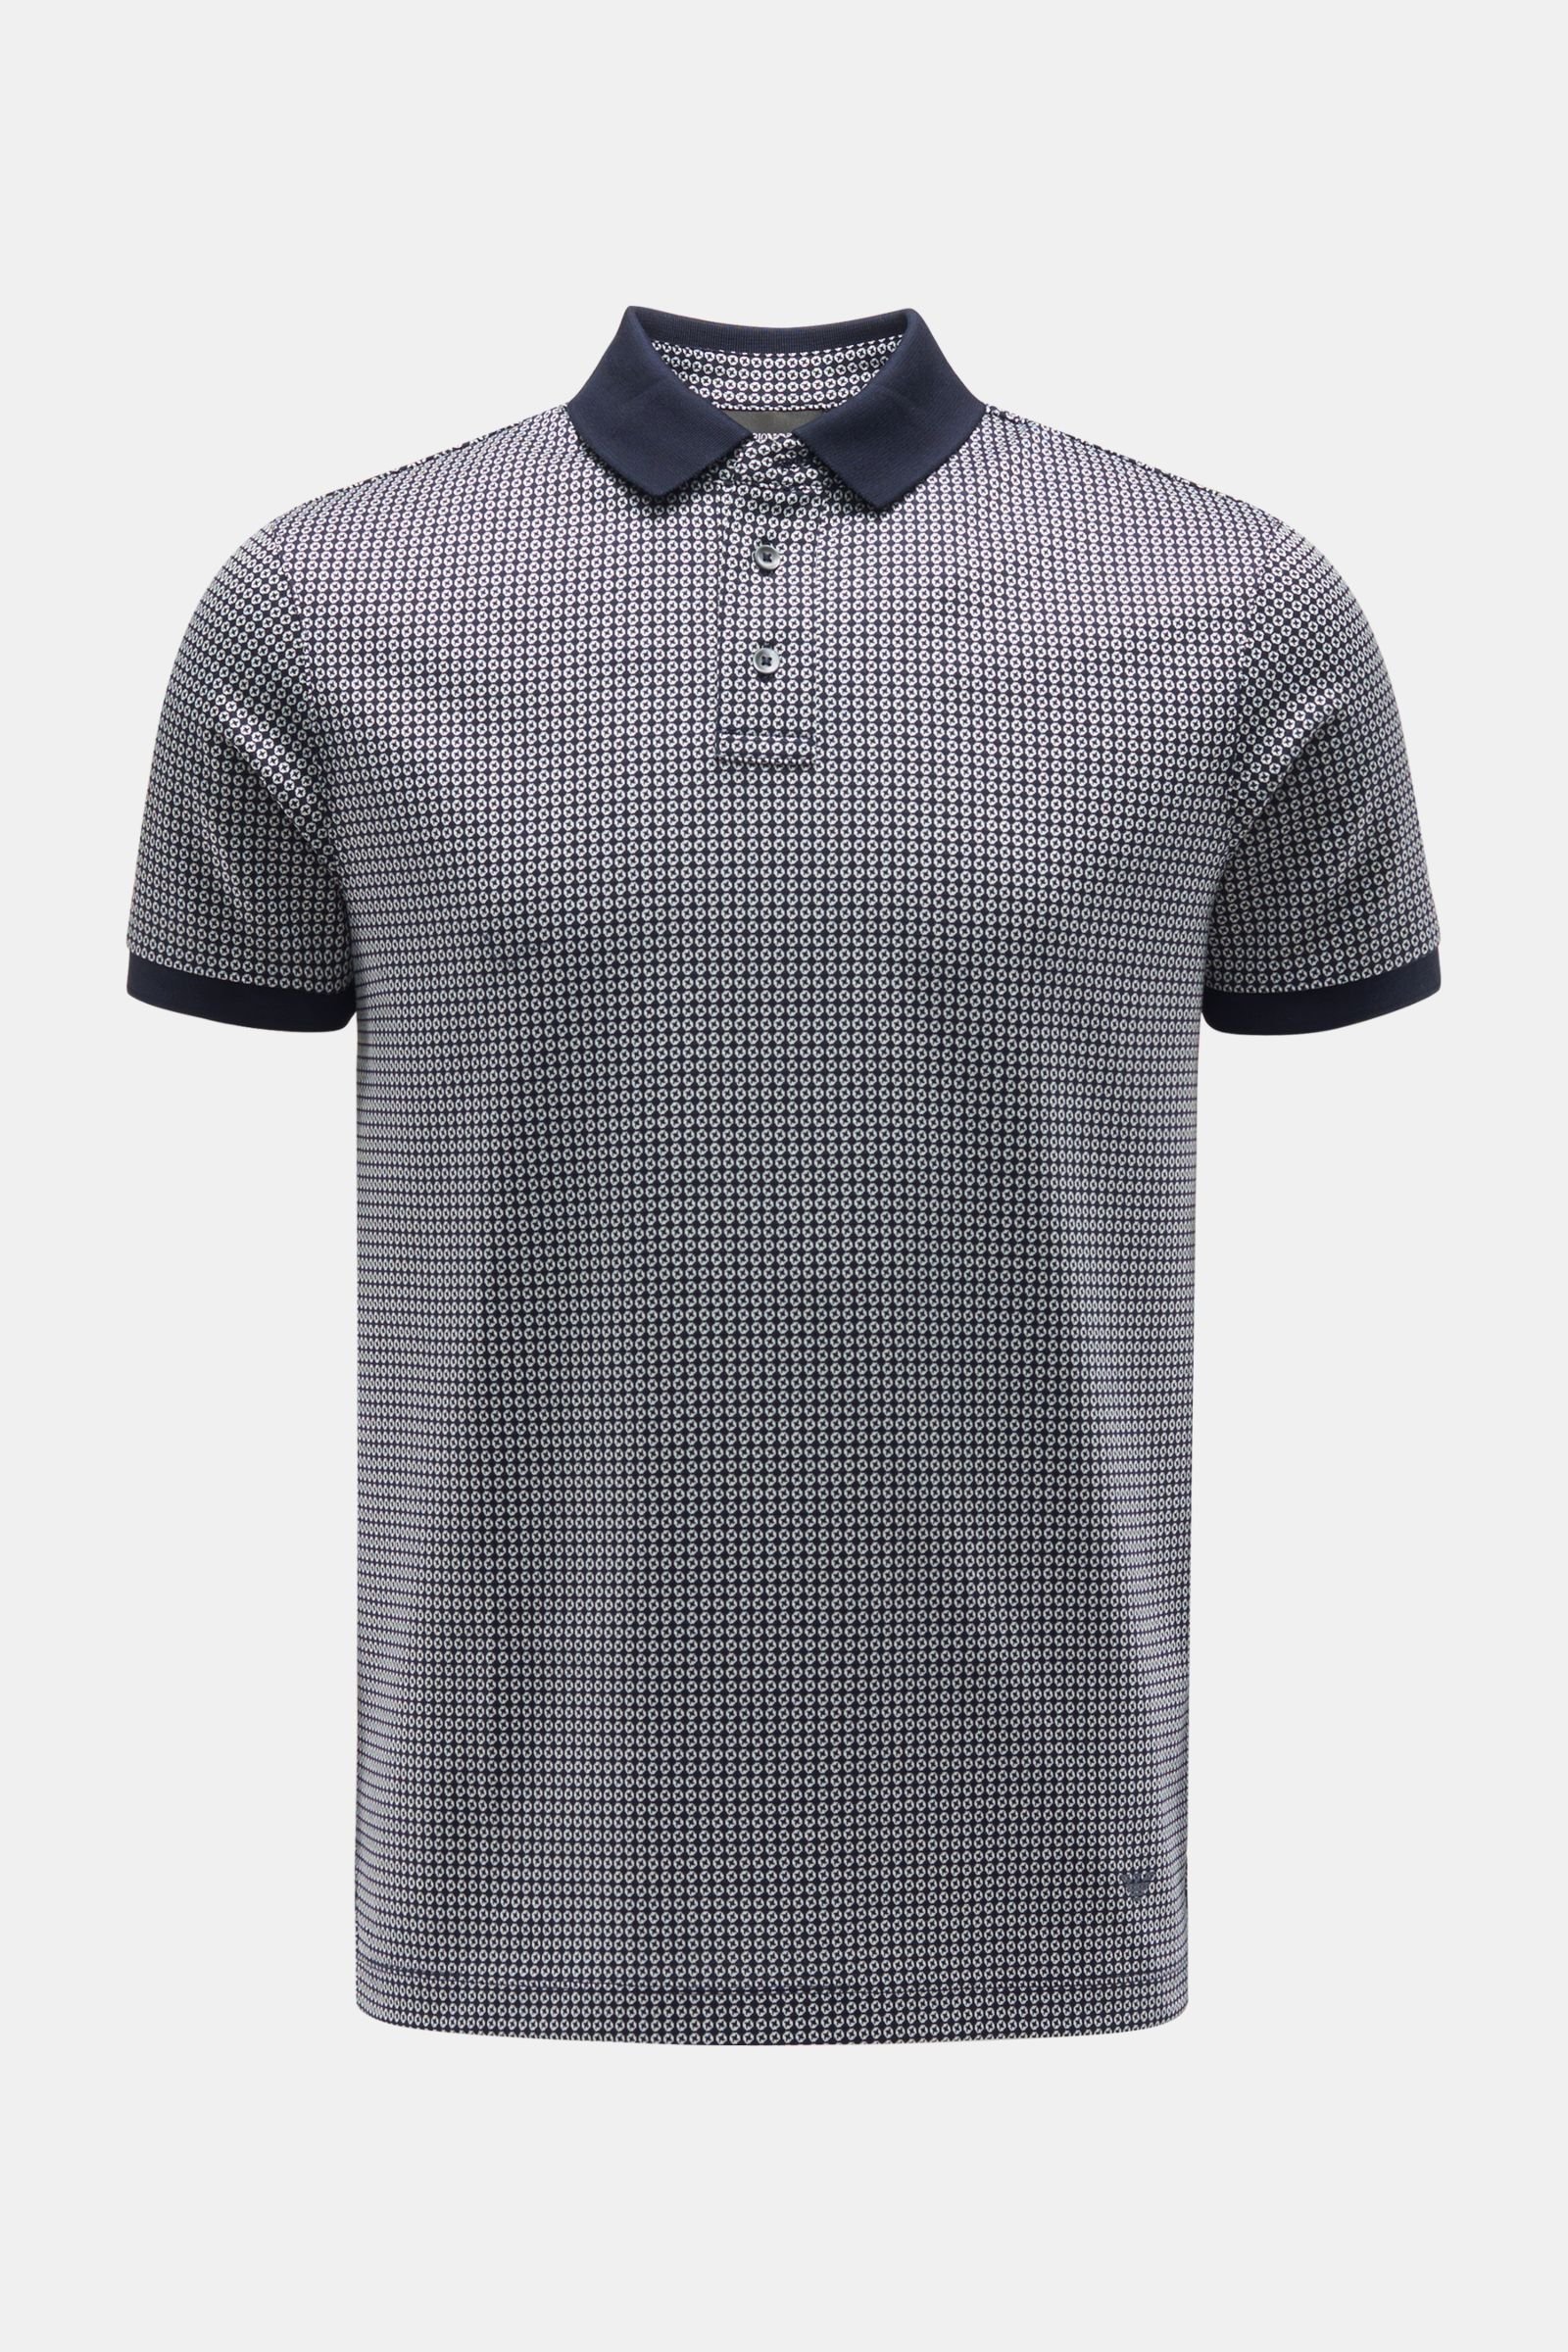 Polo shirt navy/white patterned